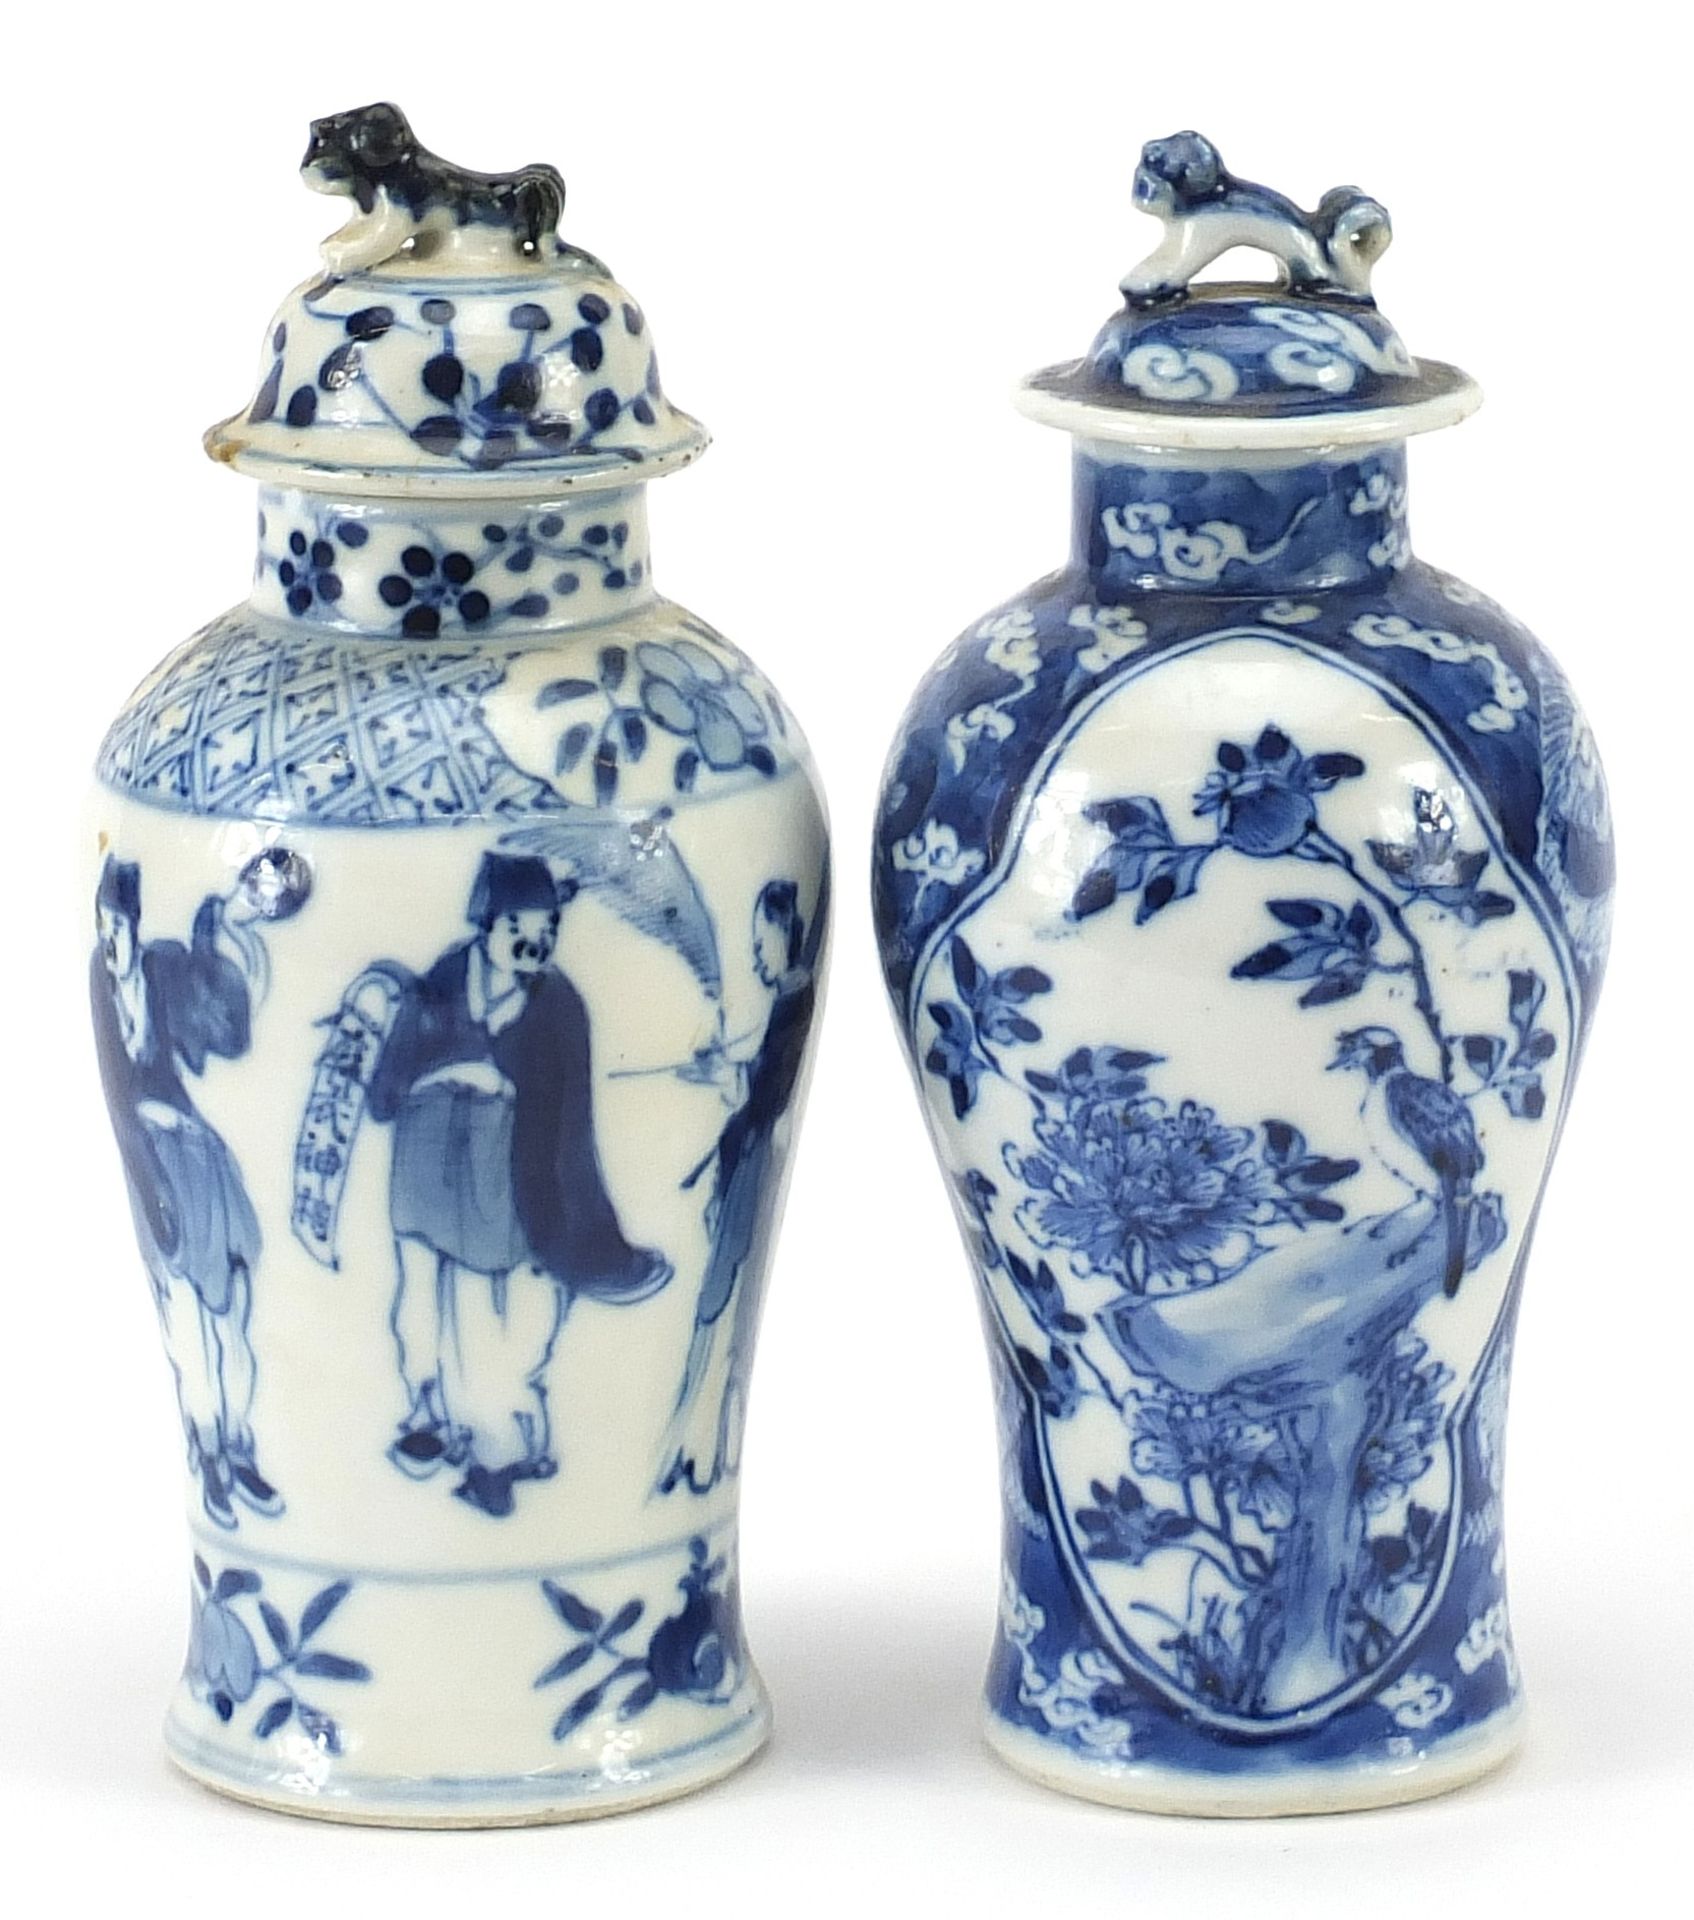 Two Chinese blue and white porcelain baluster vases with covers, hand painted with birds amongst